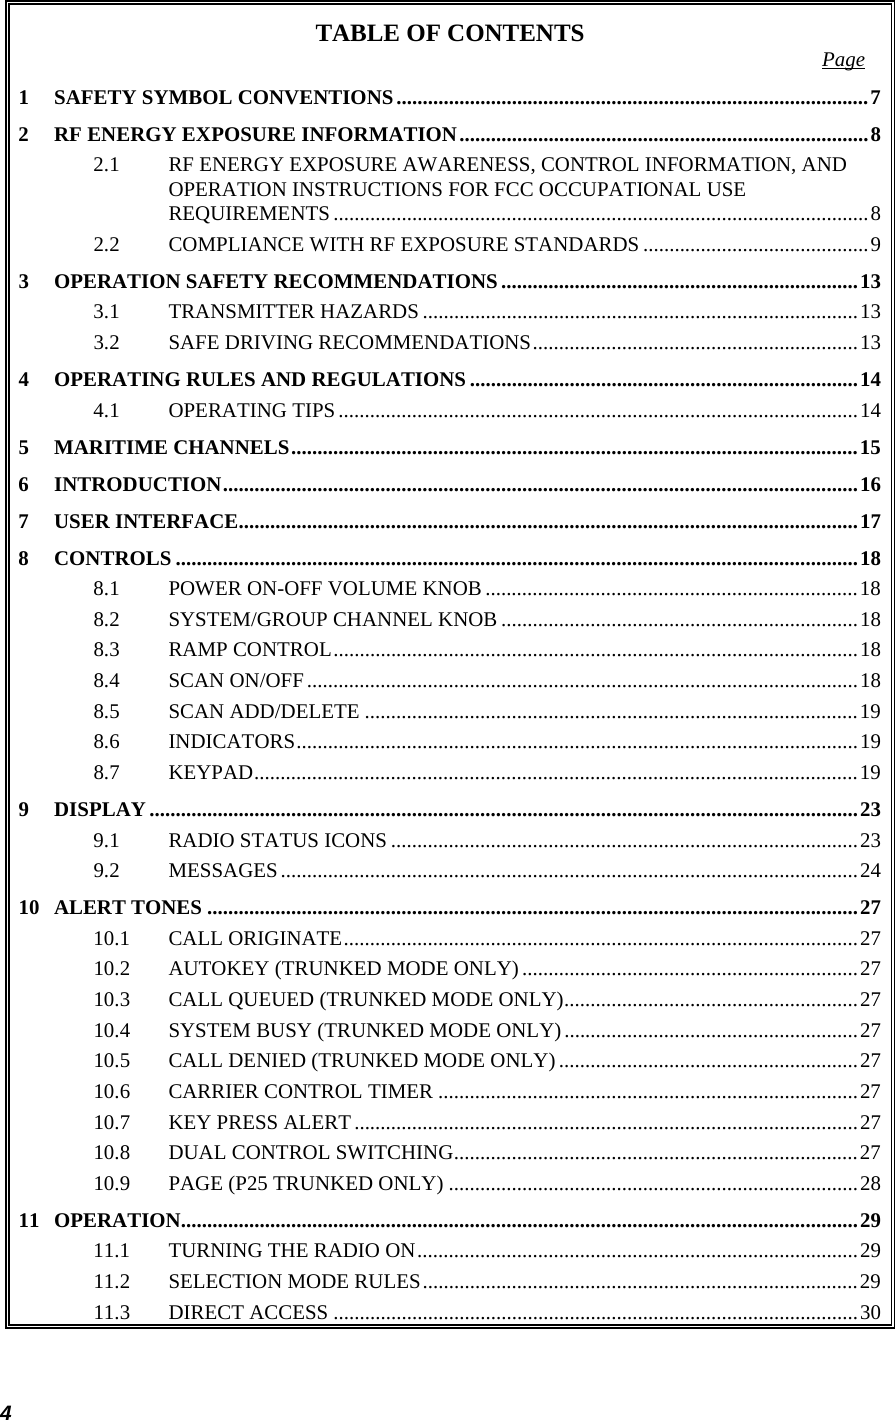  4 TABLE OF CONTENTS  Page 1 SAFETY SYMBOL CONVENTIONS..........................................................................................72 RF ENERGY EXPOSURE INFORMATION..............................................................................82.1 RF ENERGY EXPOSURE AWARENESS, CONTROL INFORMATION, AND OPERATION INSTRUCTIONS FOR FCC OCCUPATIONAL USE REQUIREMENTS......................................................................................................82.2 COMPLIANCE WITH RF EXPOSURE STANDARDS ...........................................93 OPERATION SAFETY RECOMMENDATIONS....................................................................133.1 TRANSMITTER HAZARDS ...................................................................................133.2 SAFE DRIVING RECOMMENDATIONS..............................................................134 OPERATING RULES AND REGULATIONS ..........................................................................144.1 OPERATING TIPS...................................................................................................145 MARITIME CHANNELS............................................................................................................156 INTRODUCTION.........................................................................................................................167 USER INTERFACE......................................................................................................................178 CONTROLS ..................................................................................................................................188.1 POWER ON-OFF VOLUME KNOB .......................................................................188.2 SYSTEM/GROUP CHANNEL KNOB ....................................................................188.3 RAMP CONTROL....................................................................................................188.4 SCAN ON/OFF.........................................................................................................188.5 SCAN ADD/DELETE ..............................................................................................198.6 INDICATORS...........................................................................................................198.7 KEYPAD...................................................................................................................199 DISPLAY.......................................................................................................................................239.1 RADIO STATUS ICONS .........................................................................................239.2 MESSAGES..............................................................................................................2410 ALERT TONES ............................................................................................................................2710.1 CALL ORIGINATE..................................................................................................2710.2 AUTOKEY (TRUNKED MODE ONLY)................................................................2710.3 CALL QUEUED (TRUNKED MODE ONLY)........................................................2710.4 SYSTEM BUSY (TRUNKED MODE ONLY)........................................................2710.5 CALL DENIED (TRUNKED MODE ONLY) .........................................................2710.6 CARRIER CONTROL TIMER ................................................................................2710.7 KEY PRESS ALERT................................................................................................2710.8 DUAL CONTROL SWITCHING.............................................................................2710.9 PAGE (P25 TRUNKED ONLY) ..............................................................................2811 OPERATION.................................................................................................................................2911.1 TURNING THE RADIO ON....................................................................................2911.2 SELECTION MODE RULES...................................................................................2911.3 DIRECT ACCESS ....................................................................................................30